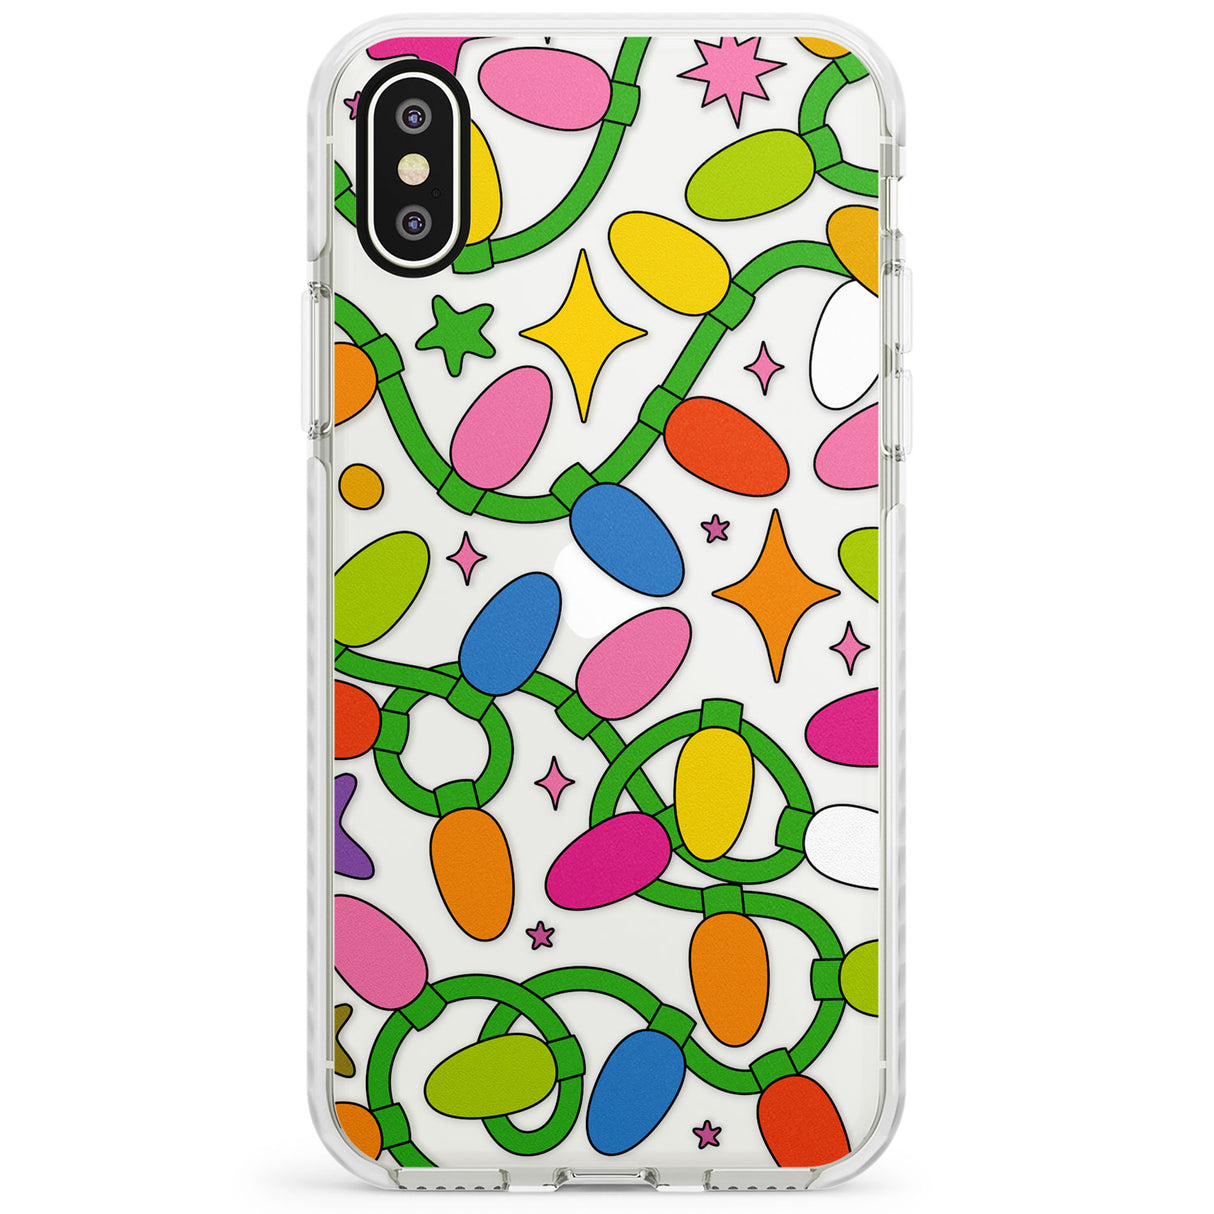 Festive Lights Pattern Impact Phone Case for iPhone X XS Max XR